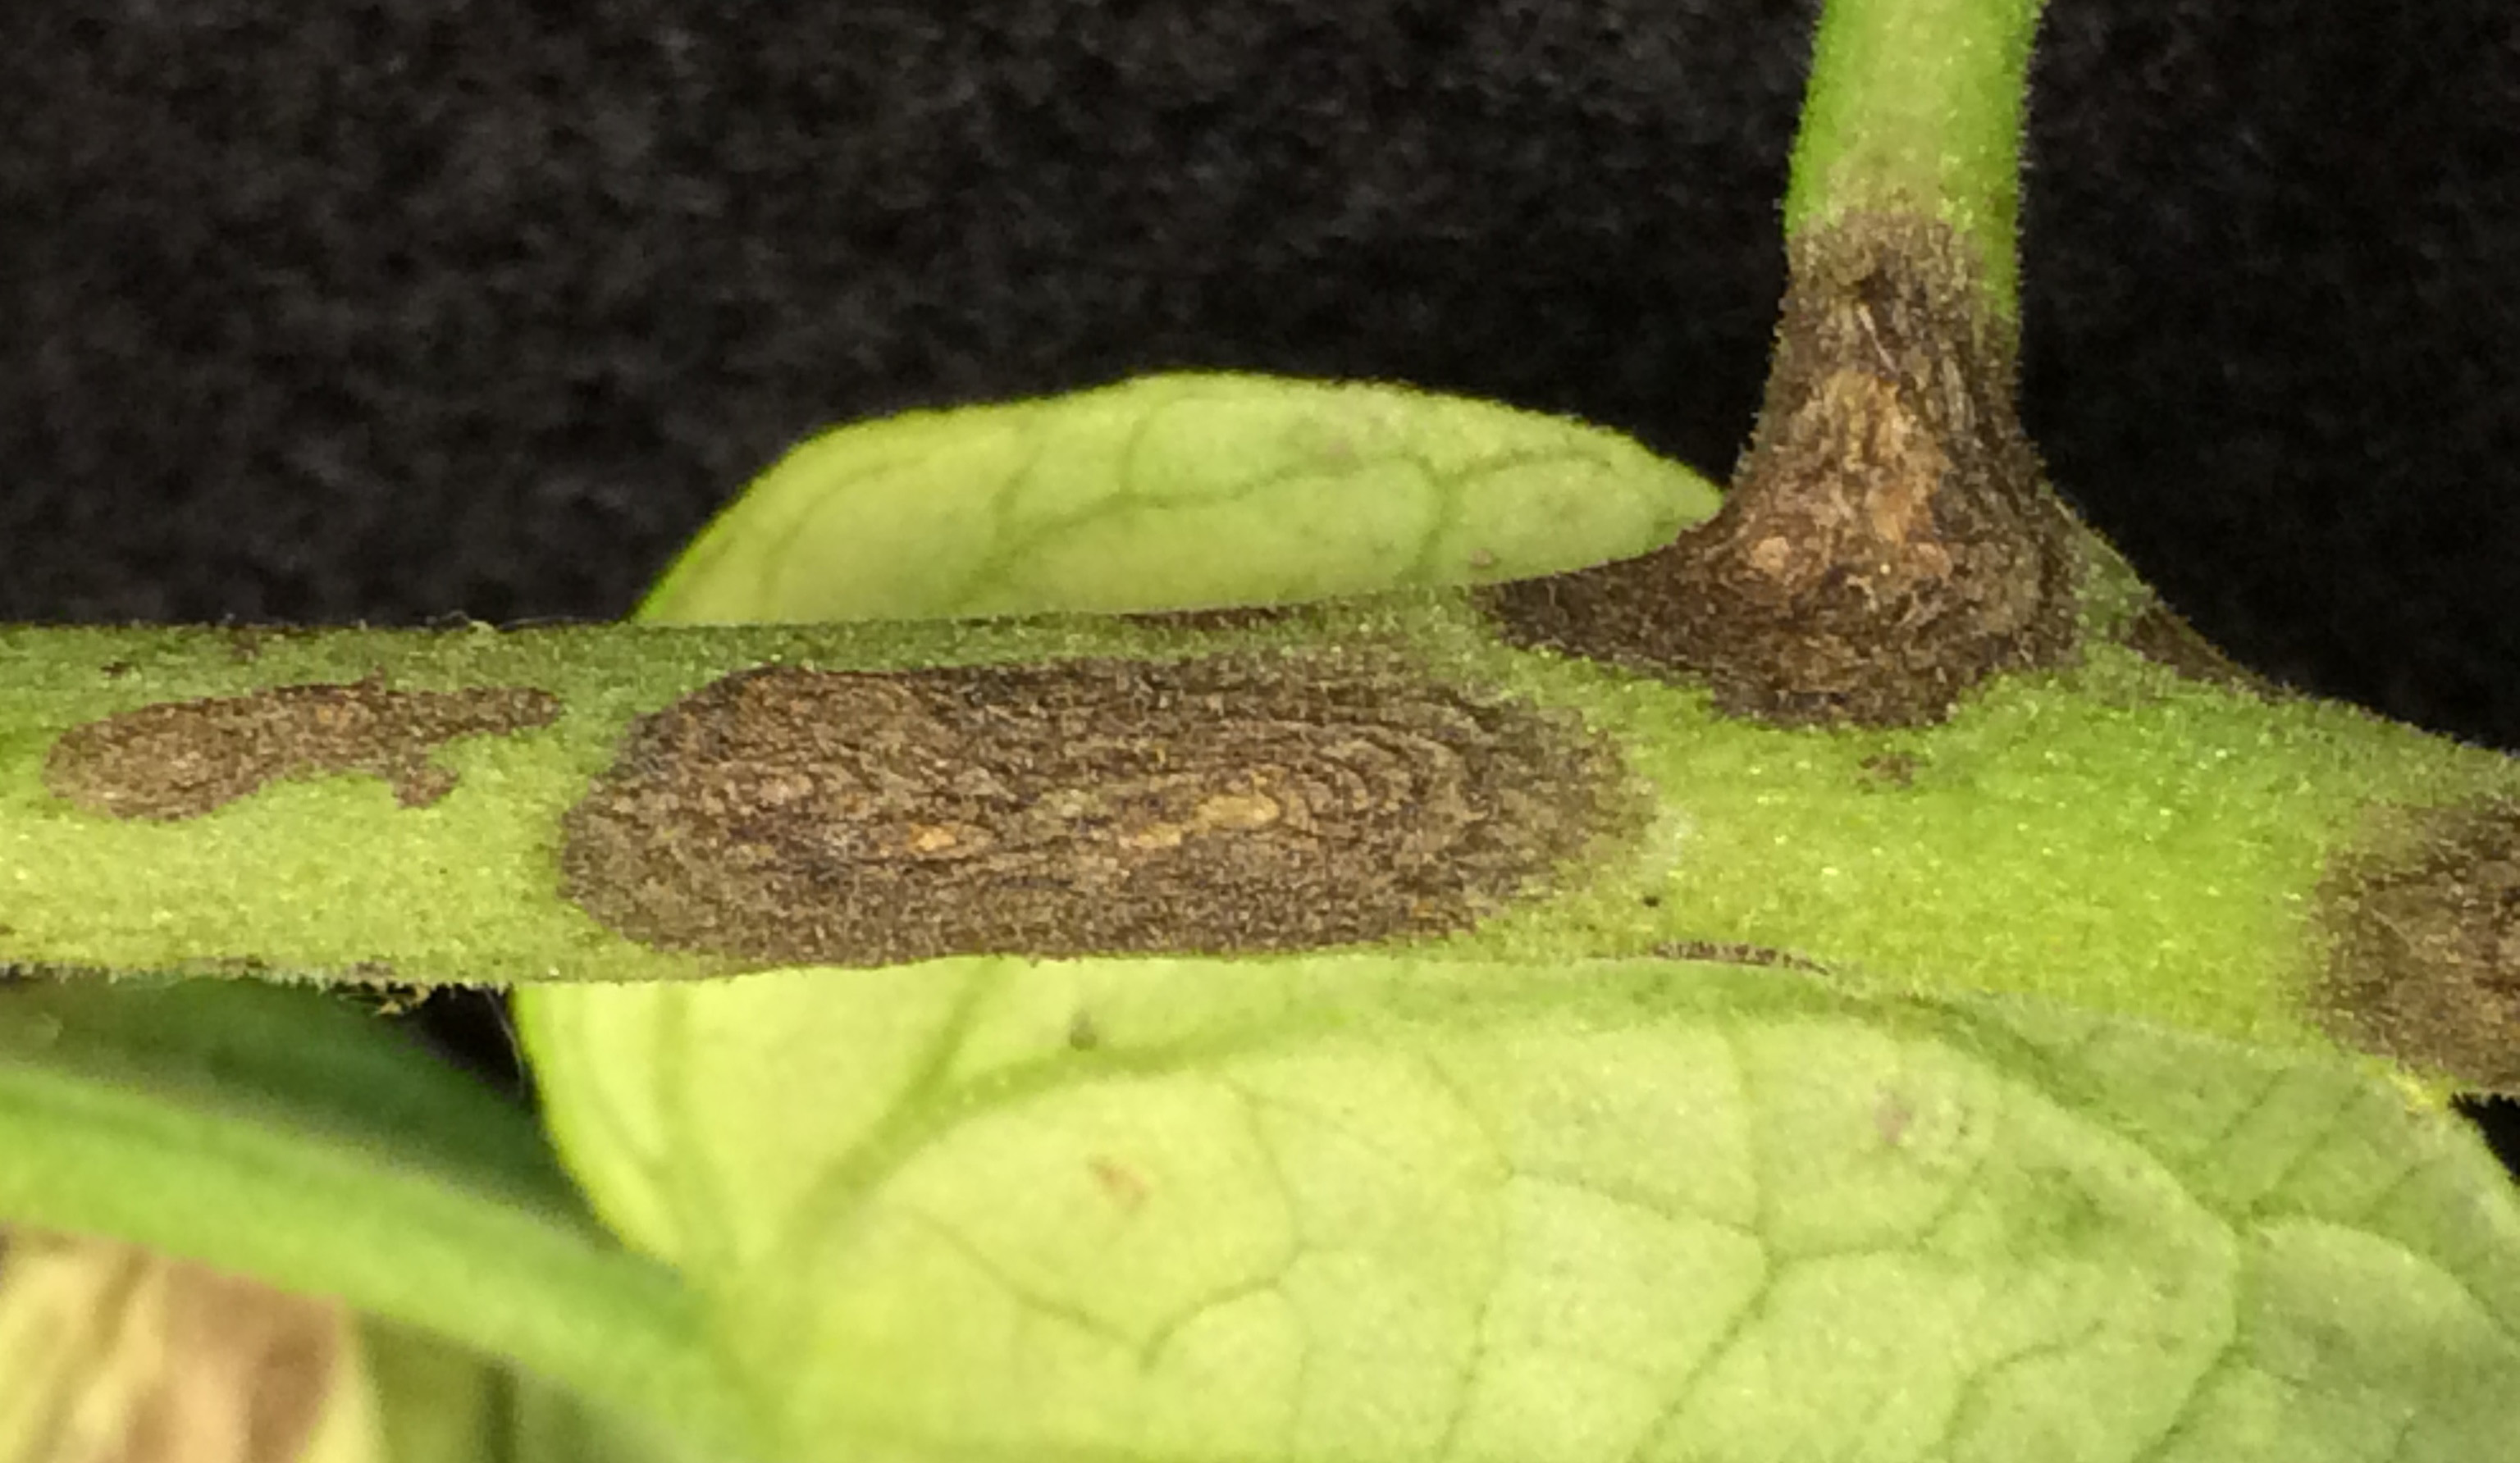 Severe early blight on tomato plant.